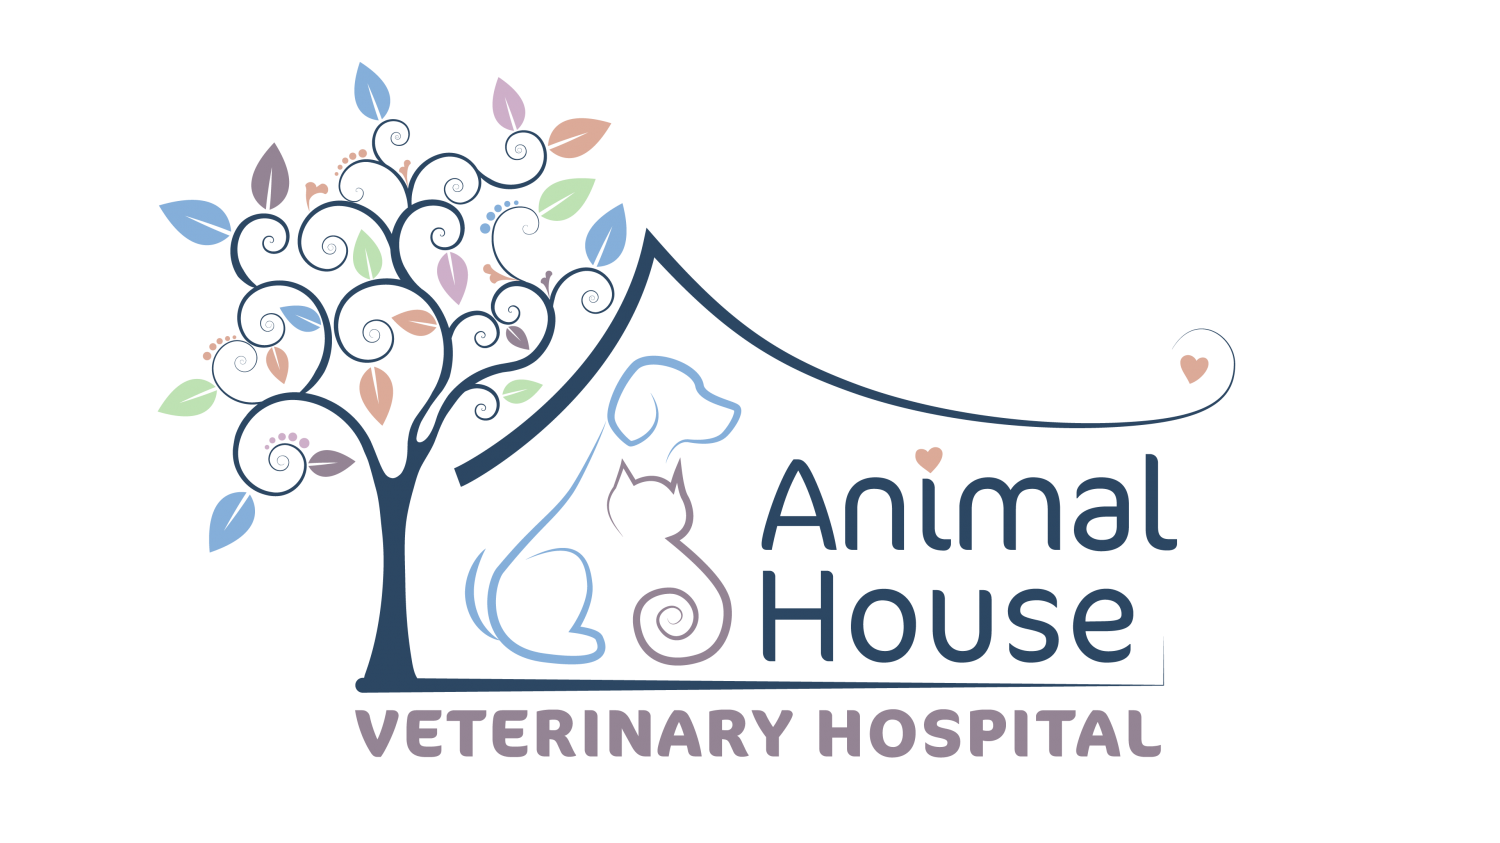 Heads or Tails Pet Grooming - Animal House Veterinary Hospital - Arnold, MO